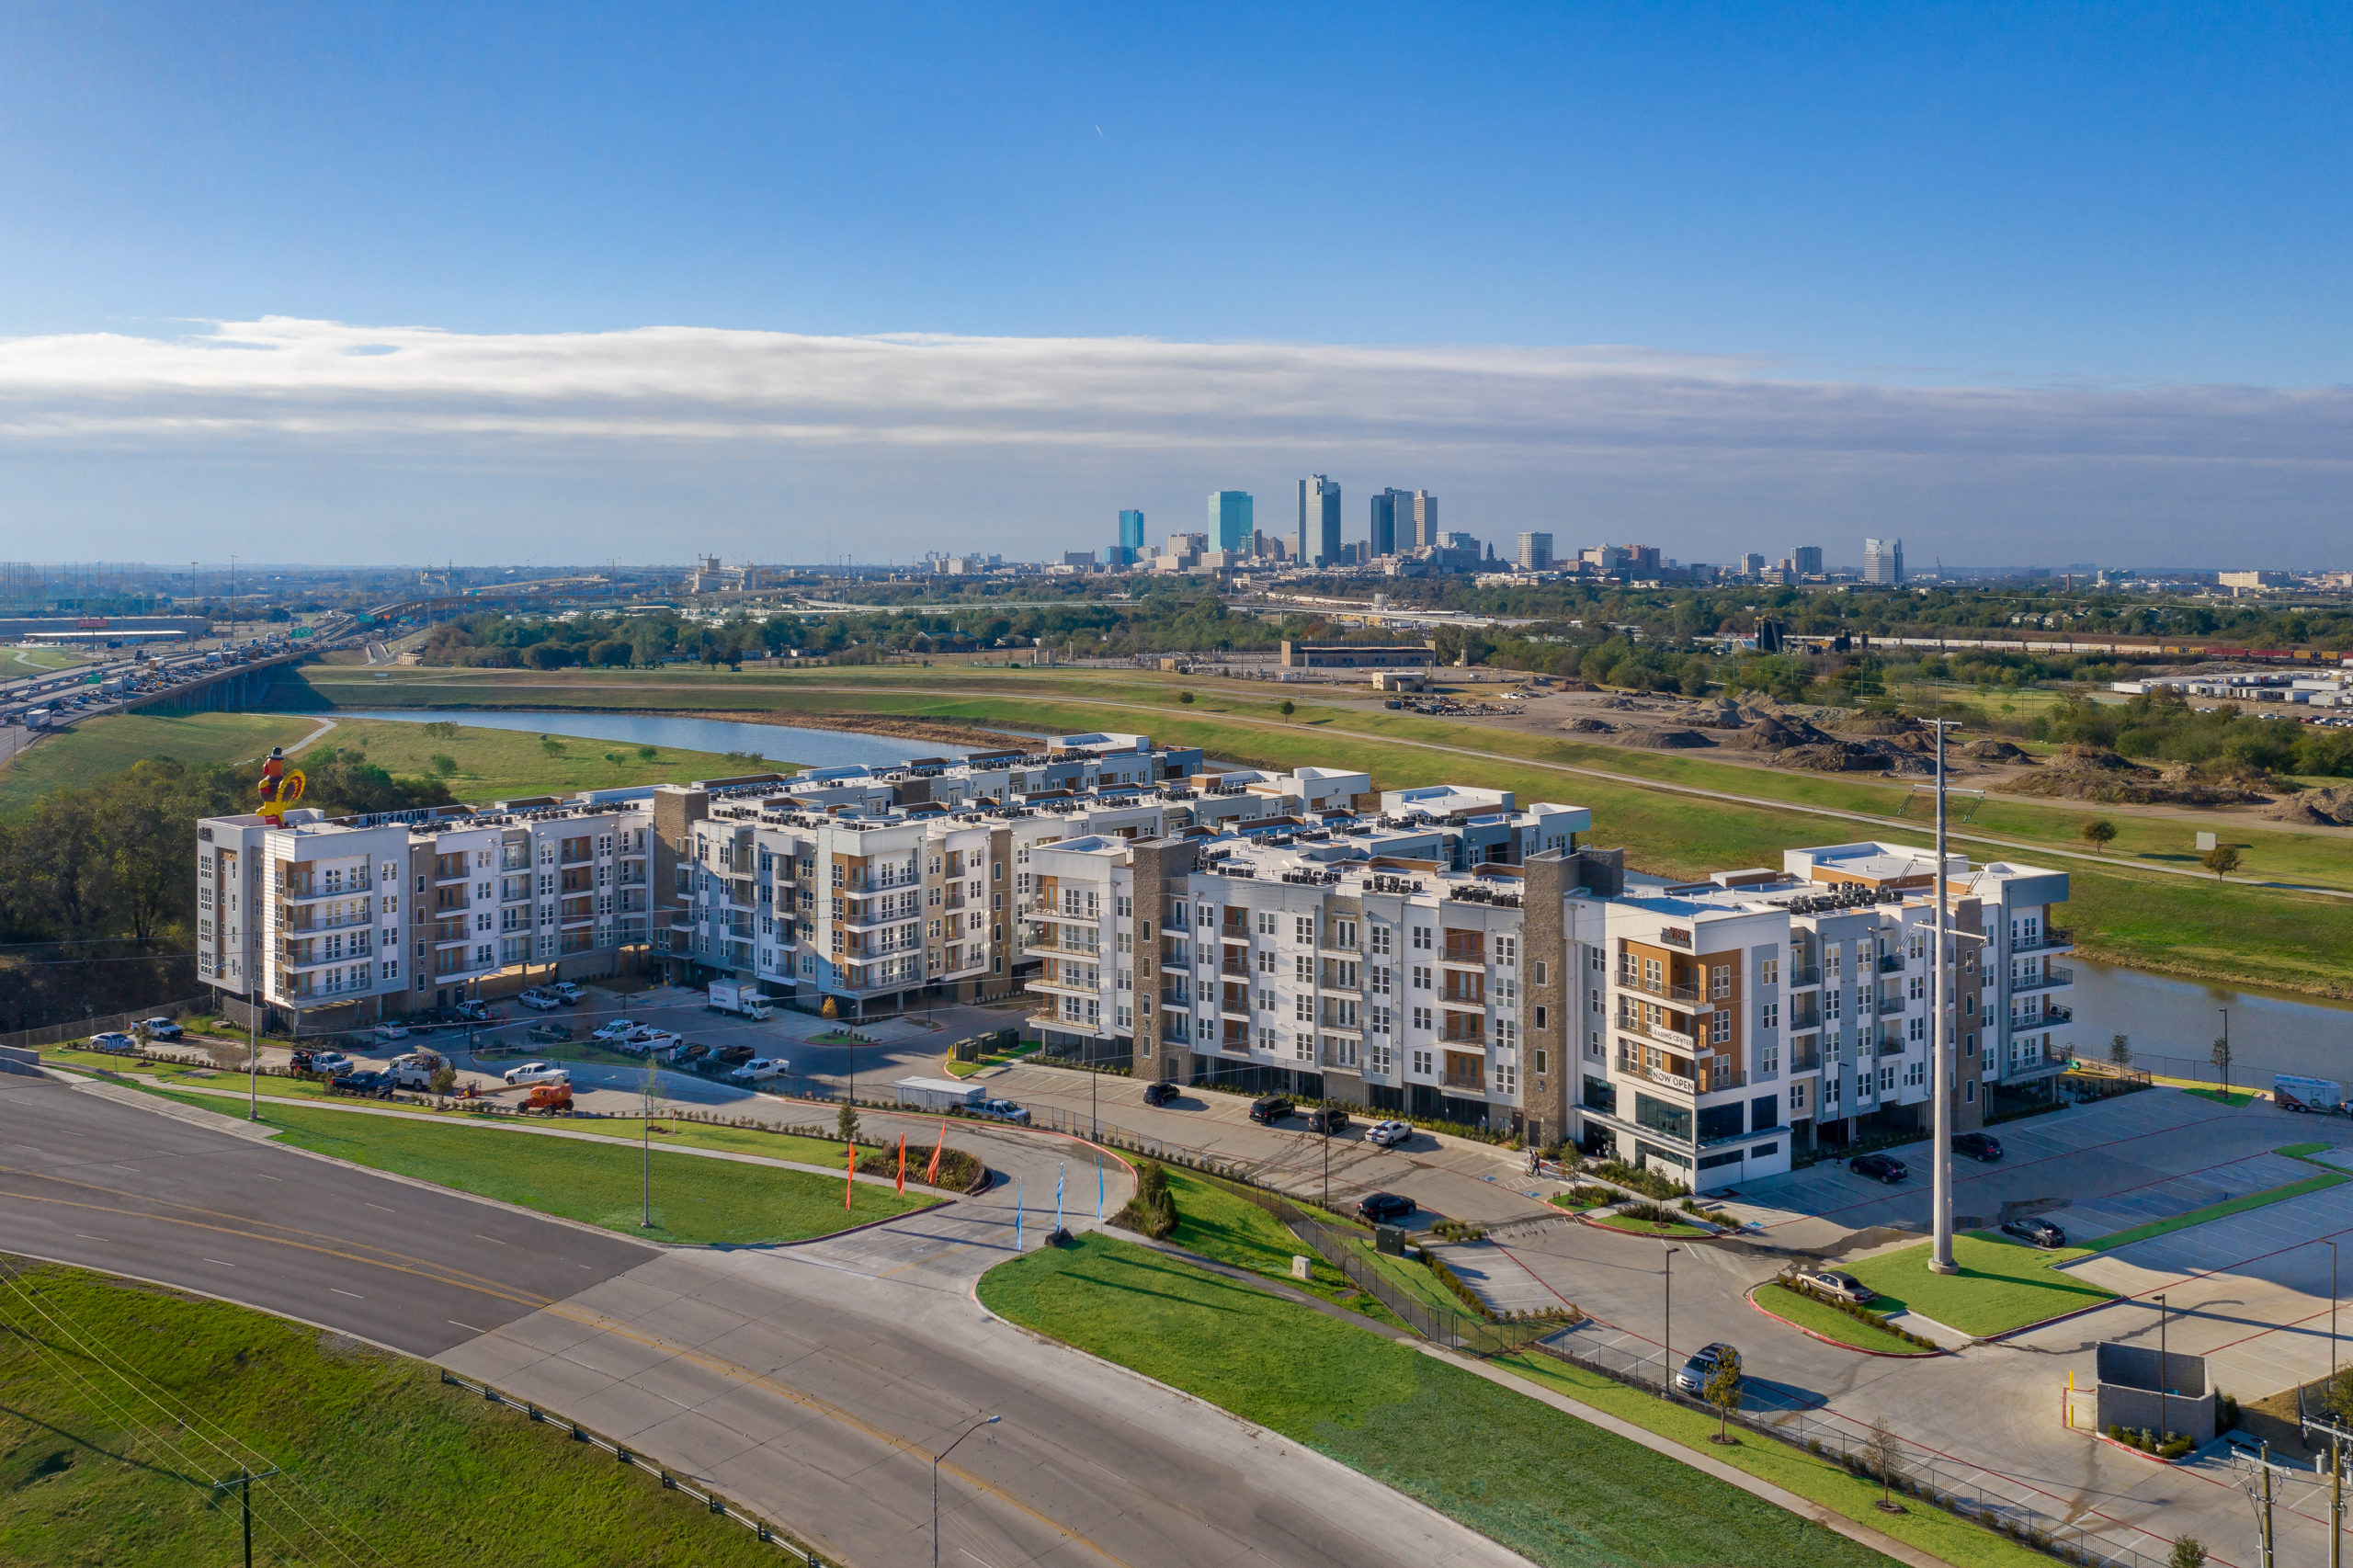 Aerial shot of CBG’s The View of Fort Worth community located at 1801 East Northside Drive, Fort Worth, TX 76102.